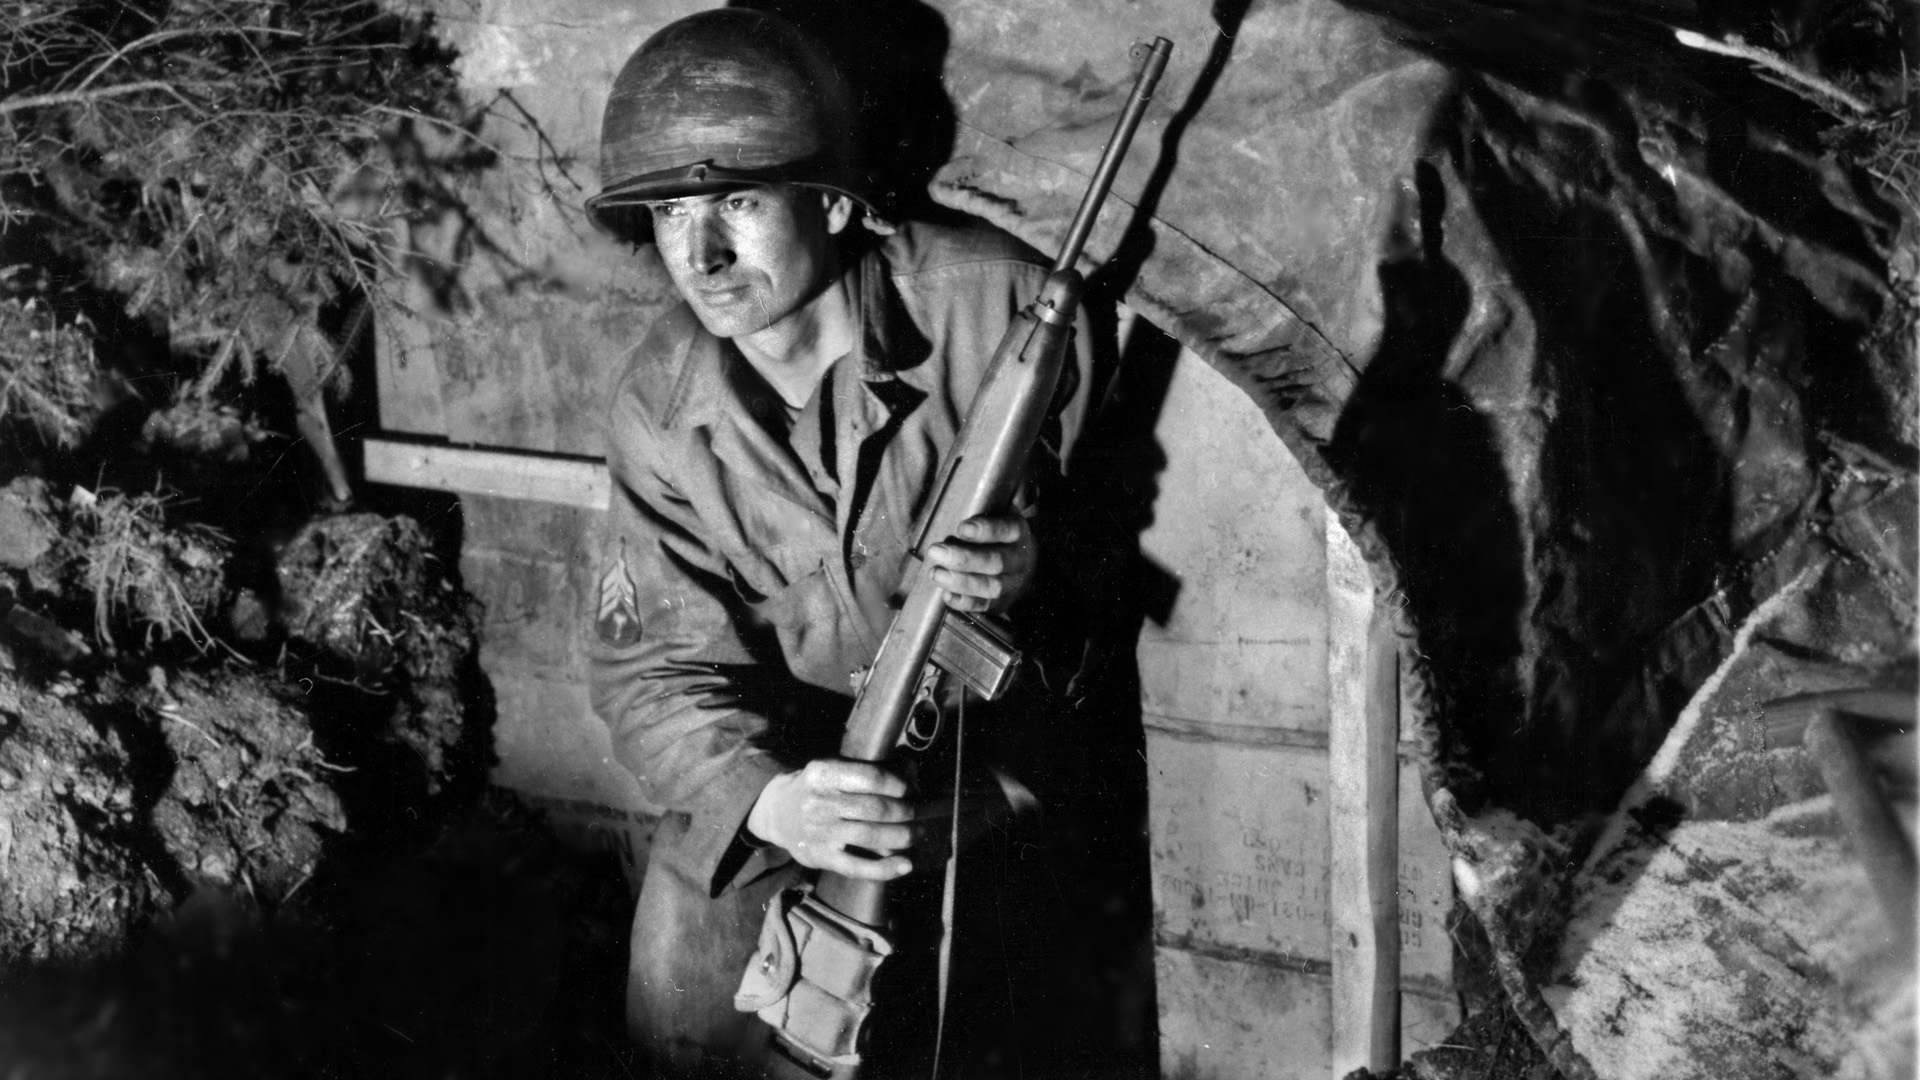 Sergeant Fred Parke of the U.S. 99th Infantry Division, armed with an M-1 carbine, peers from the dugout he occupies during the Battle of the Bulge in Belgium. The I&R Platoon of the 99th Division’s 394th Infantry Regiment held off superior German forces at the village of Lanzerath for a full day.